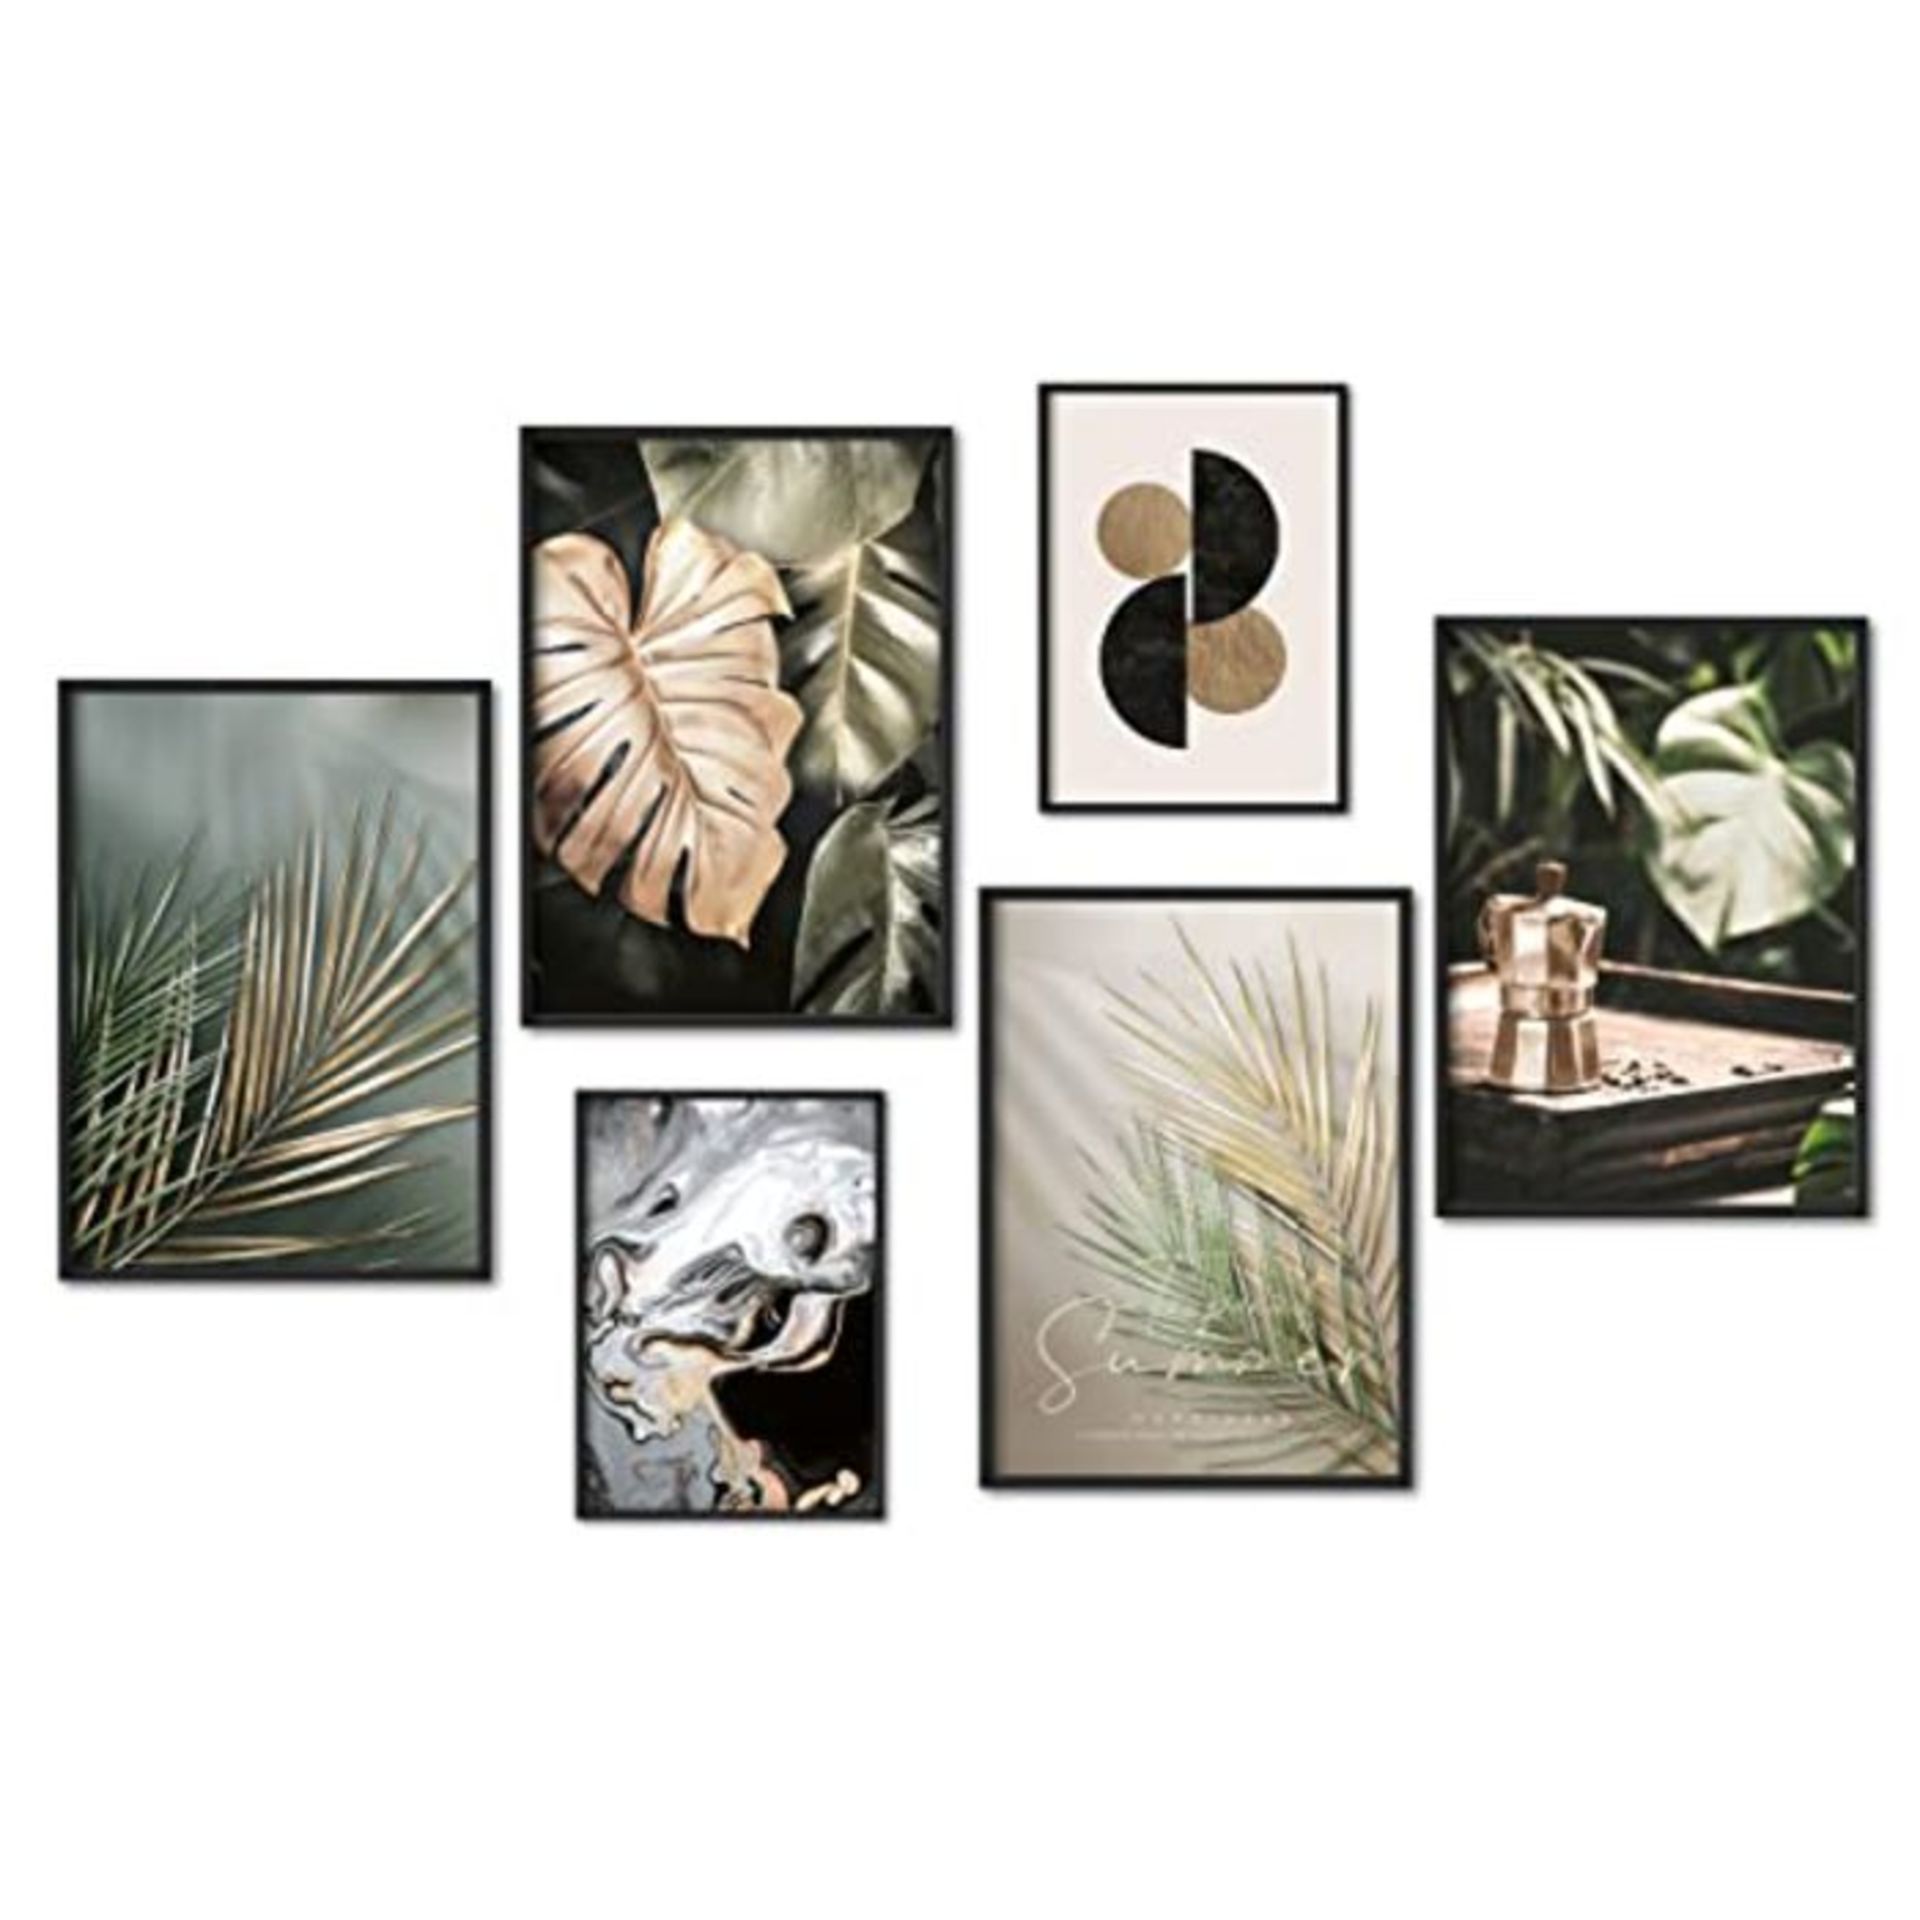 myestado - Premium Poster Set Pictures Living Room Modern Bedroom Picture for Your Wal